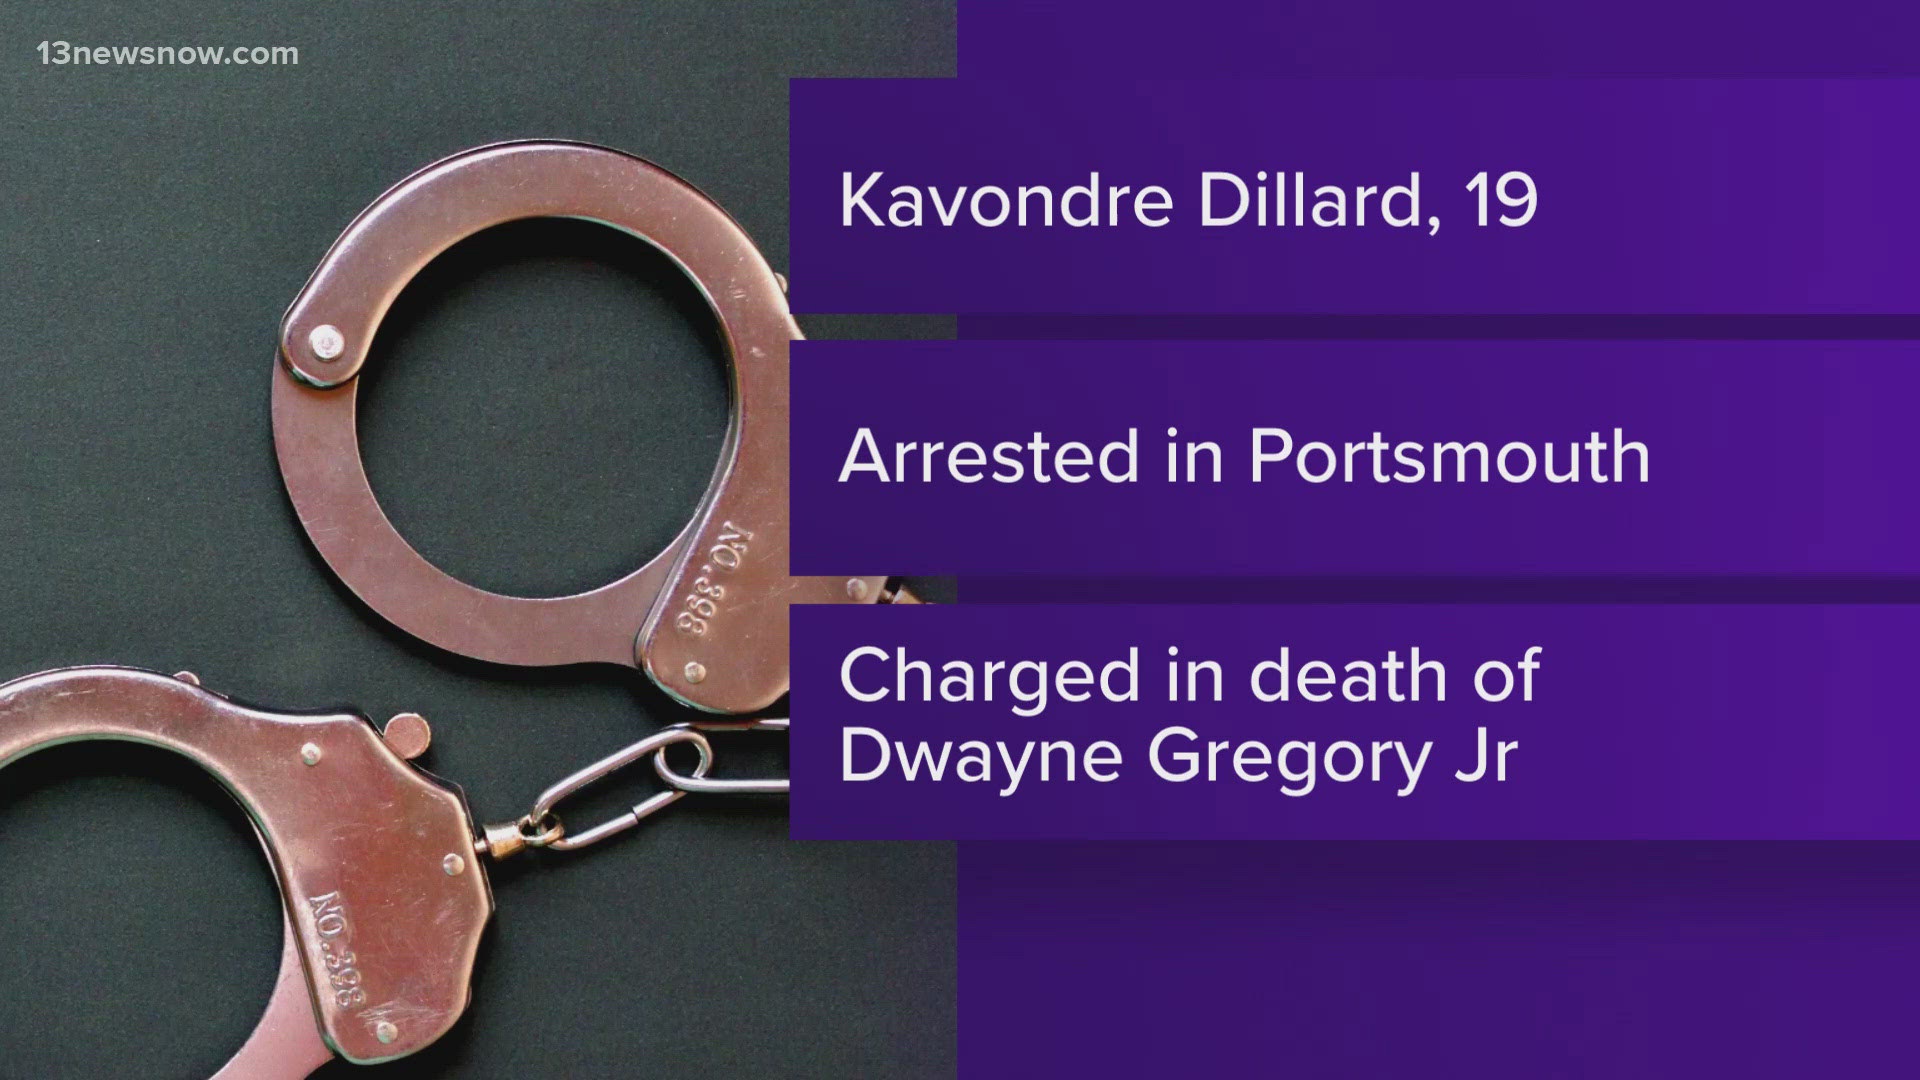 Kavondre Dillard, 19, was arrested in Portsmouth and charged in the shooting death of Dwayne Gregory Jr.